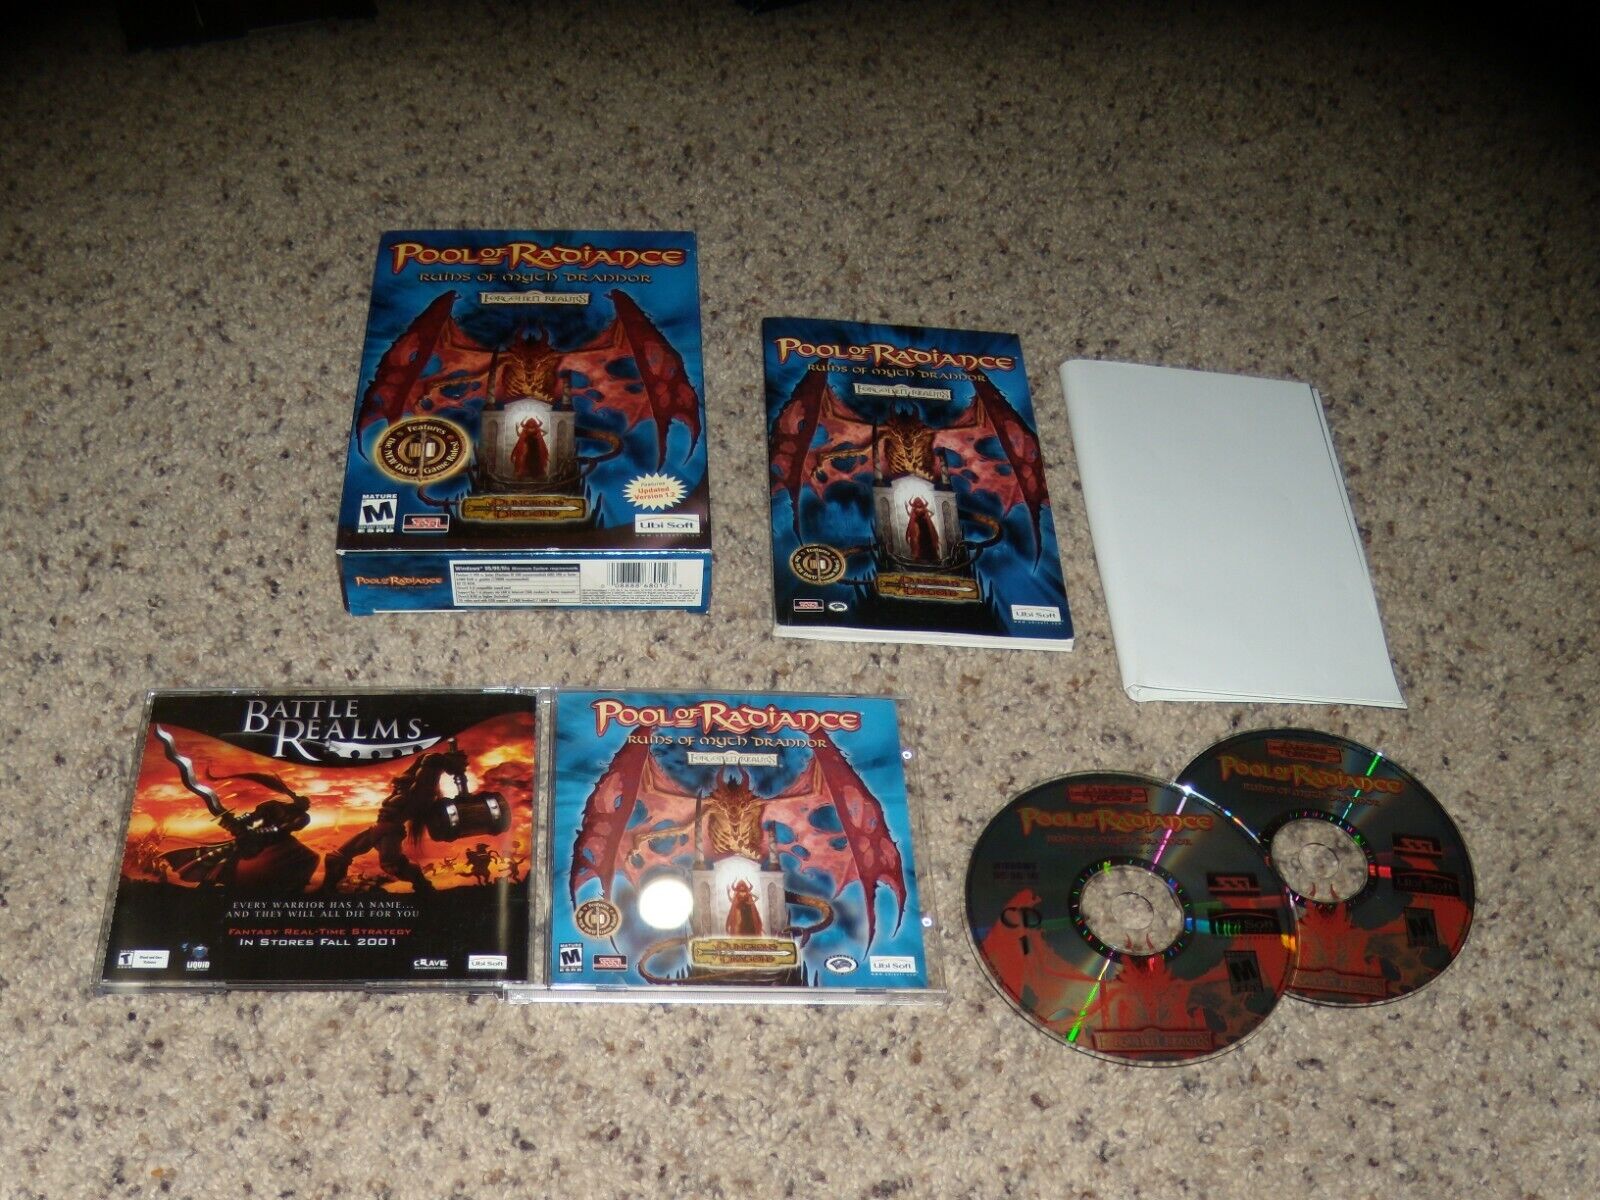 Pool of Radiance Ruins of Myth Drannor (PC, 2001) with small box and manual